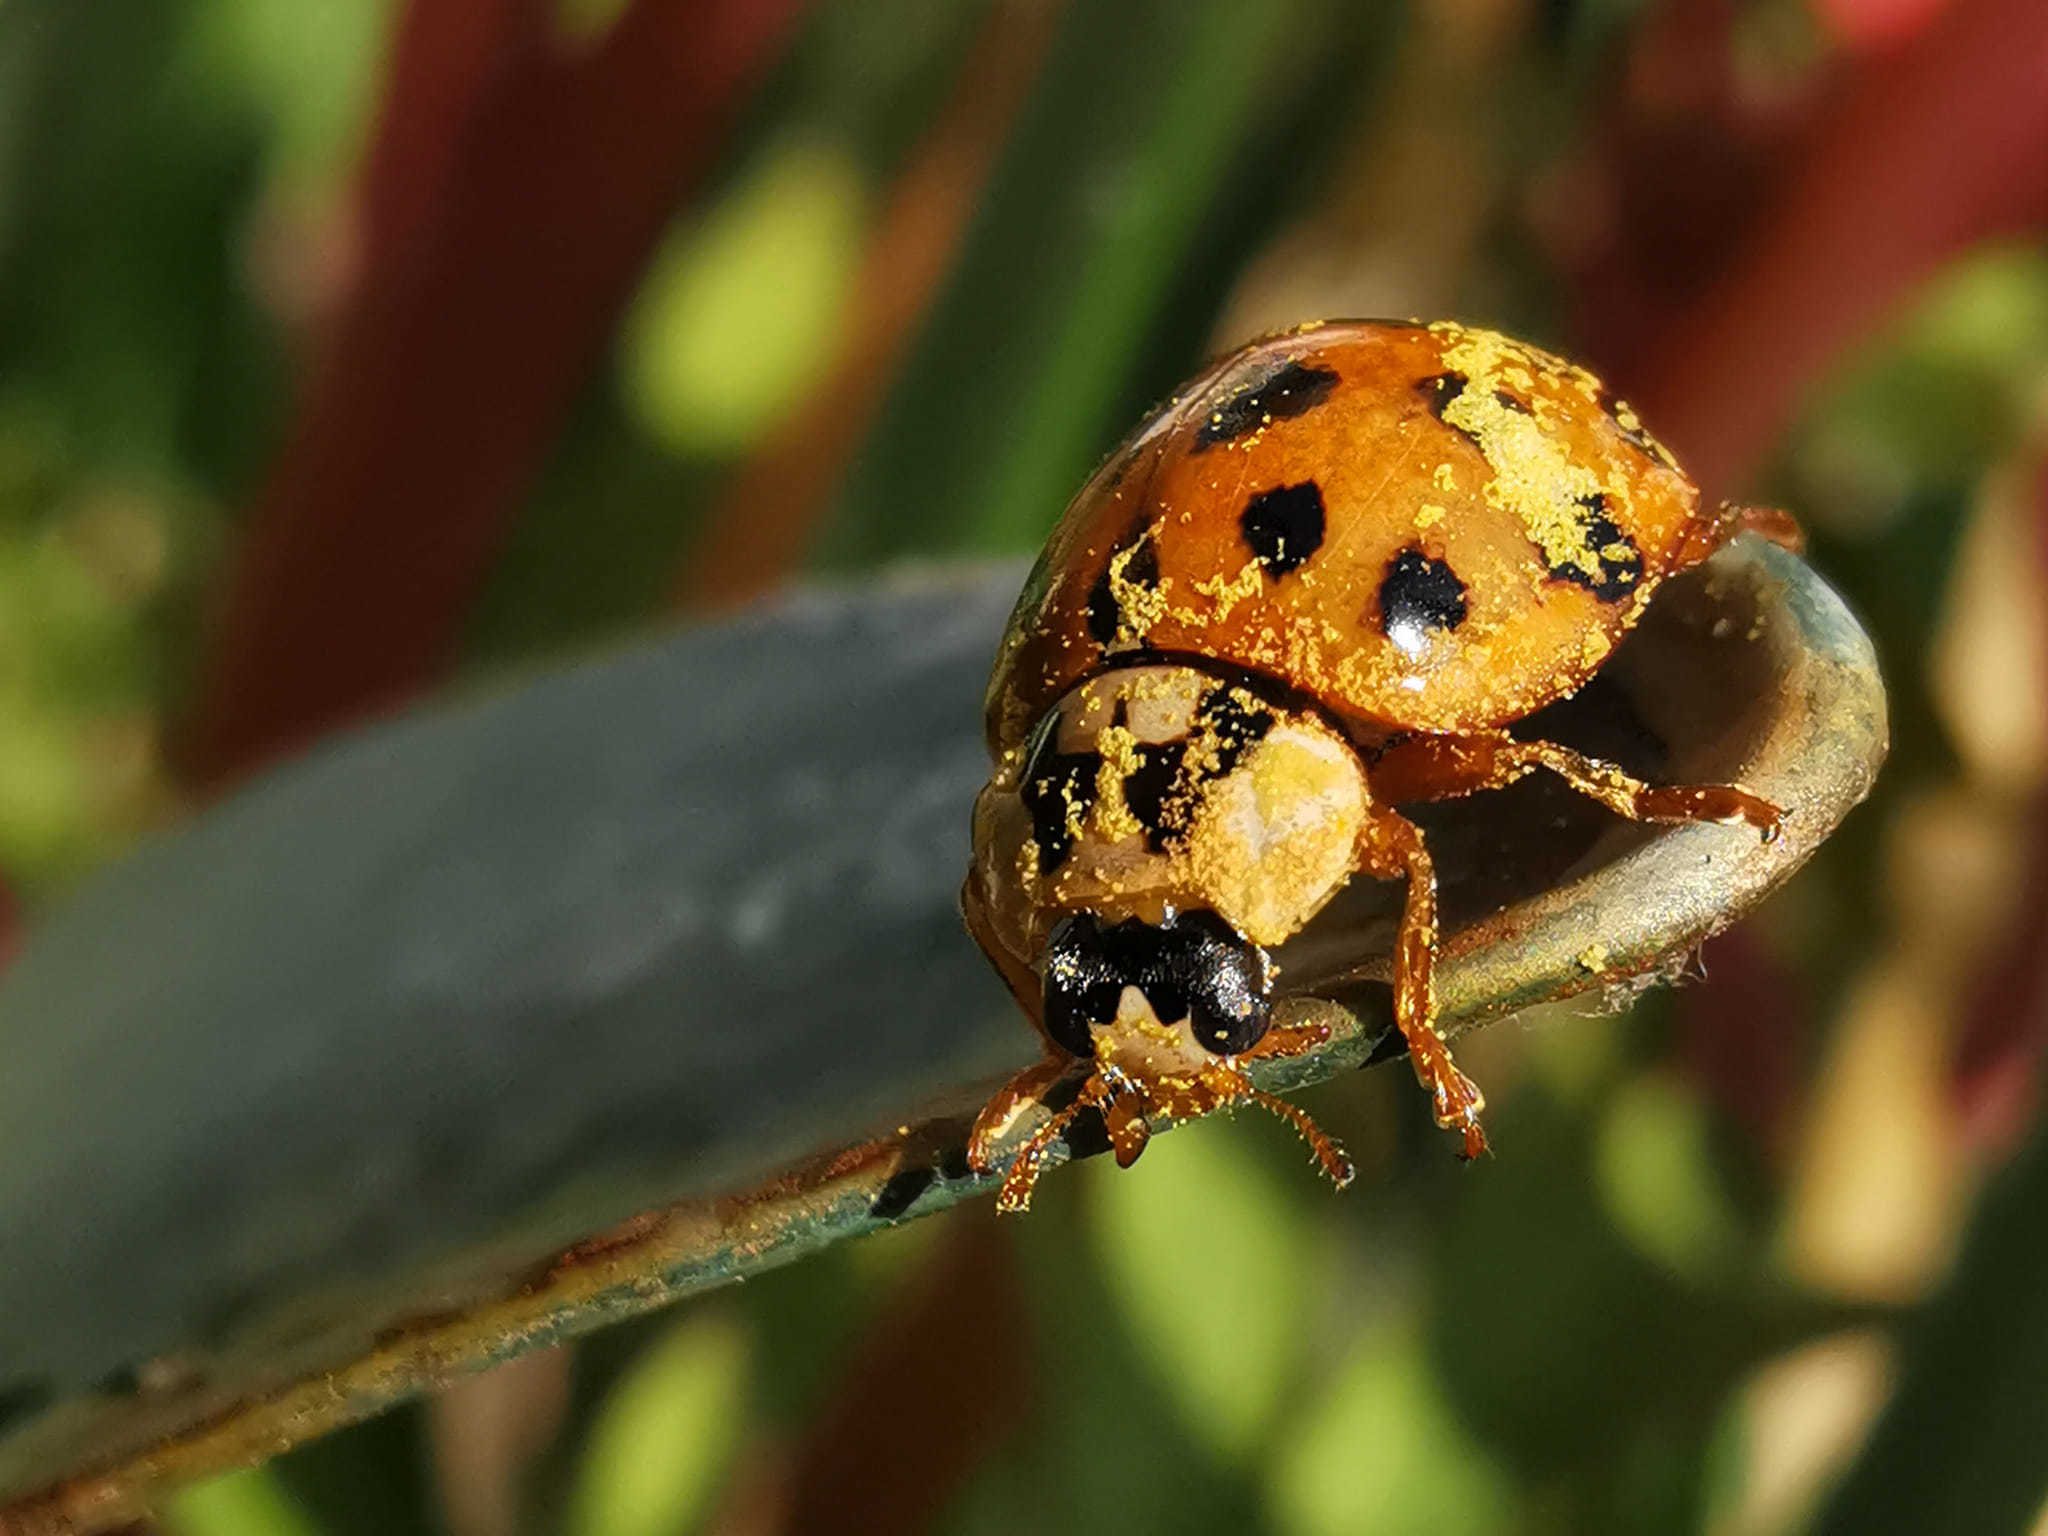 Pollen-covered ladybug. Picture: N.J Photography